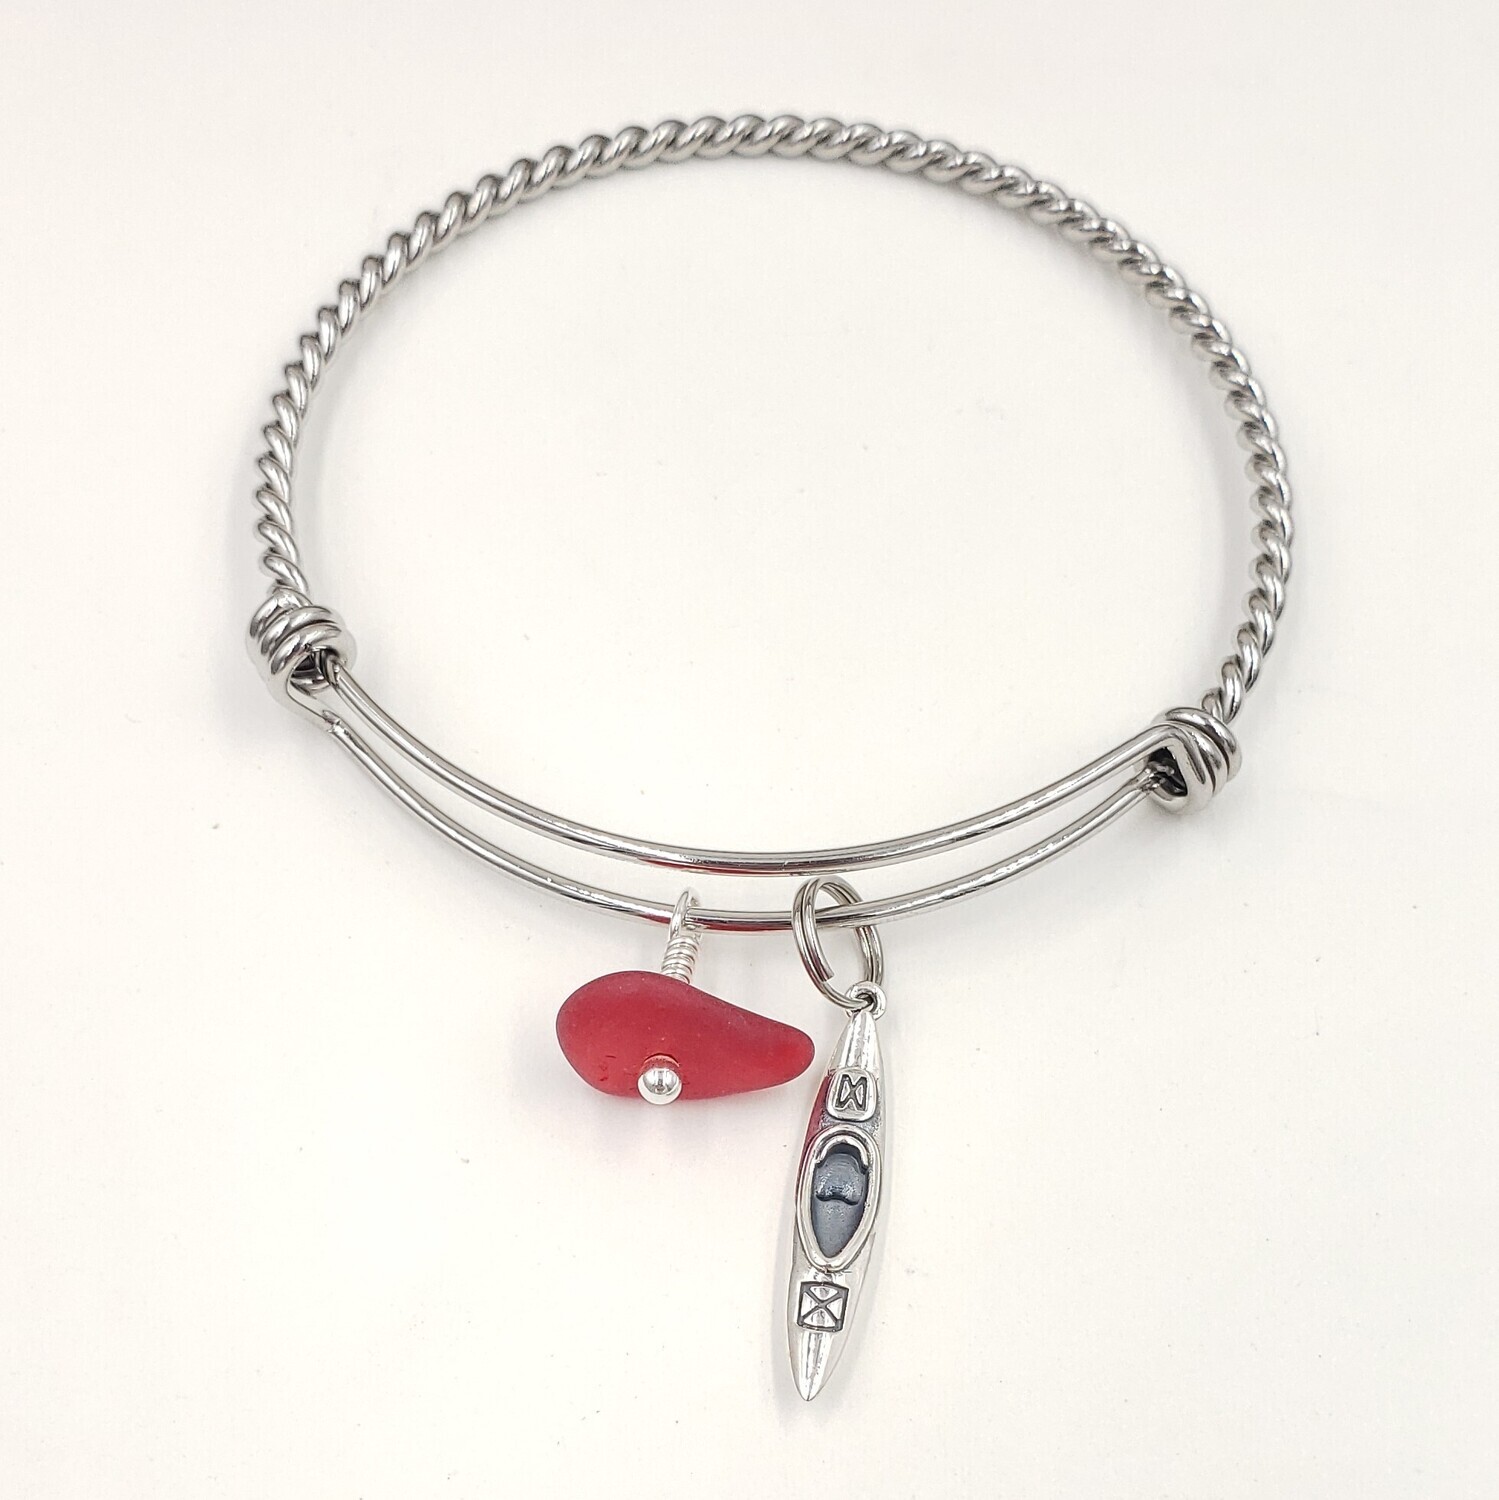 Bangle Bracelet with Kayak Charm and Red Lake Erie Beach Glass